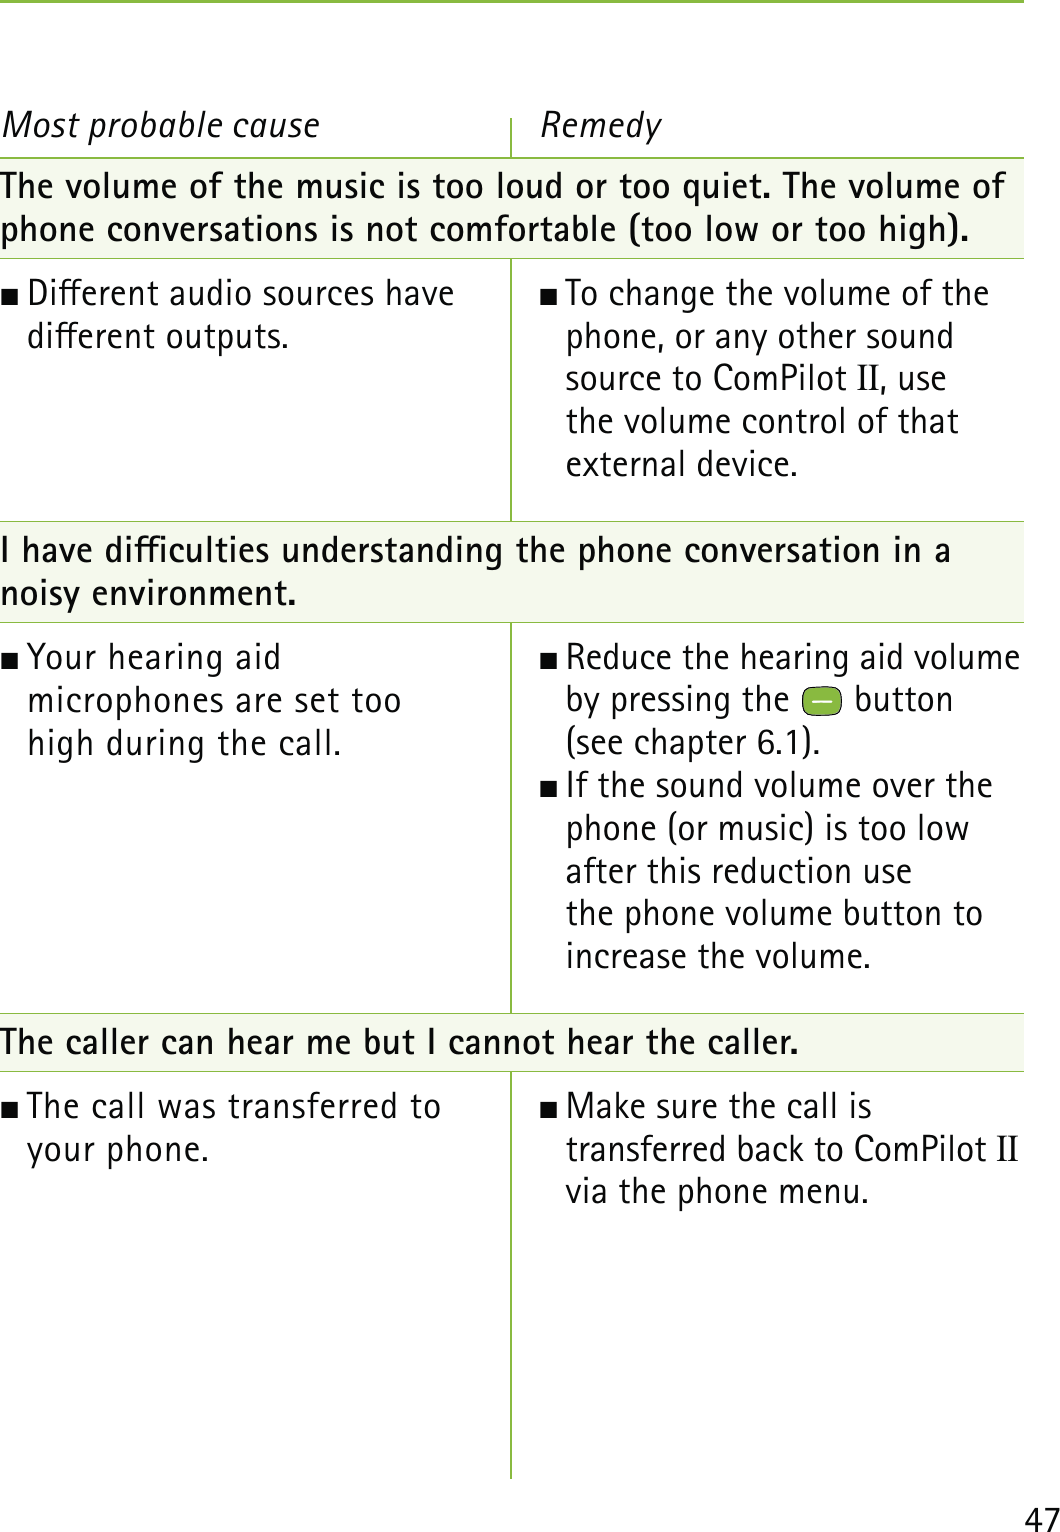 47Most probable cause RemedyThe volume of the music is too loud or too quiet. The volume of phone conversations is not comfortable (too low or too high). Dierent audio sources have  dierent outputs.   I have diculties understanding the phone conversation in a noisy environment. Your hearing aid  microphones are set too  high during the call.   The caller can hear me but I cannot hear the caller. The call was transferred to  your phone. To change the volume of the phone, or any other sound source to ComPilot II, use  the volume control of that  external device. Reduce the hearing aid volume by pressing the   button  (see chapter 6.1). If the sound volume over the phone (or music) is too low after this reduction use  the phone volume button to increase the volume. Make sure the call is  transferred back to ComPilot II via the phone menu.